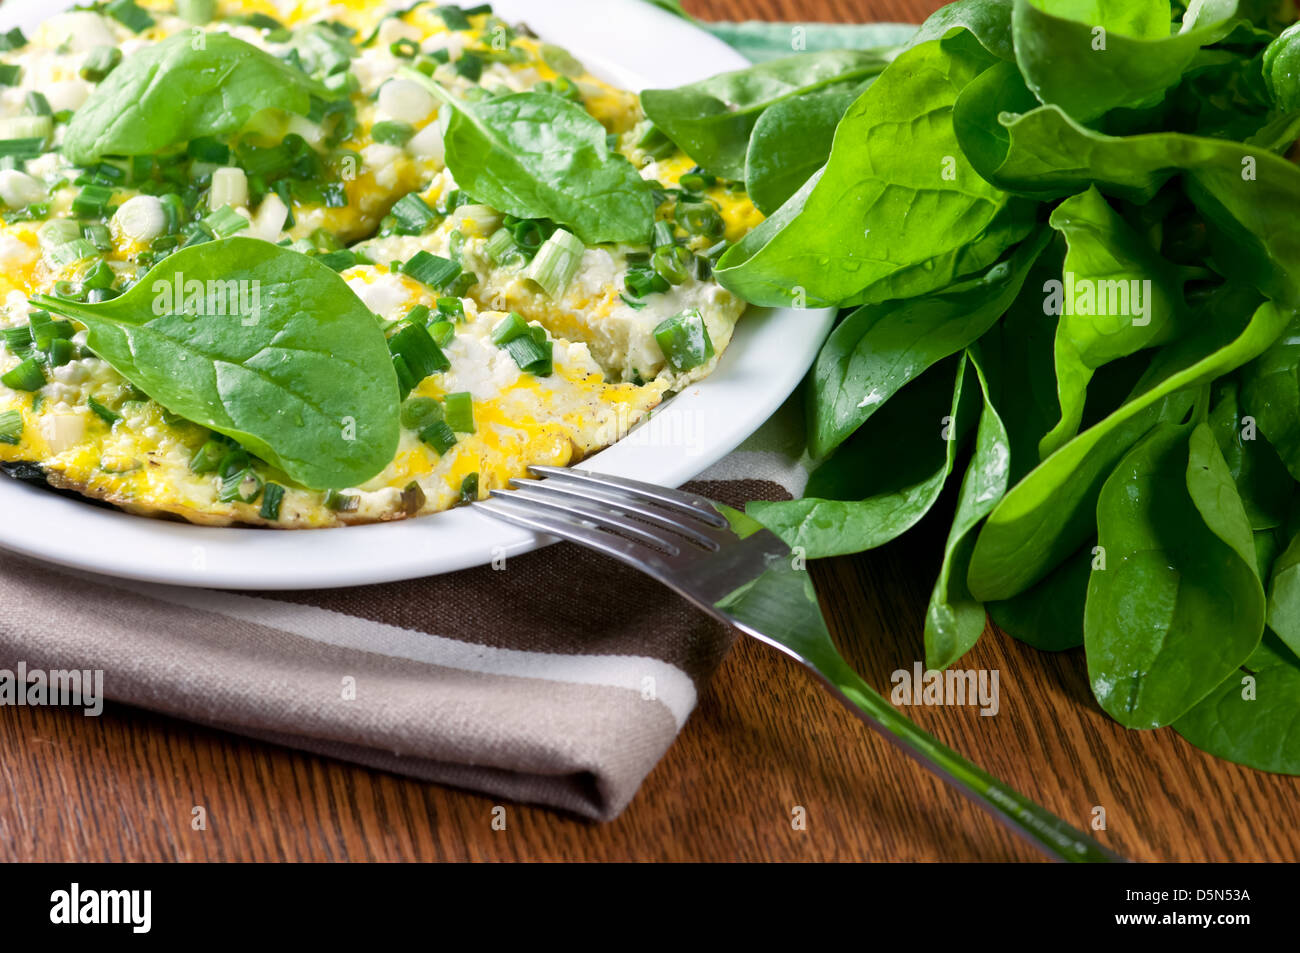 morning breakfast with spinach omelet Stock Photo